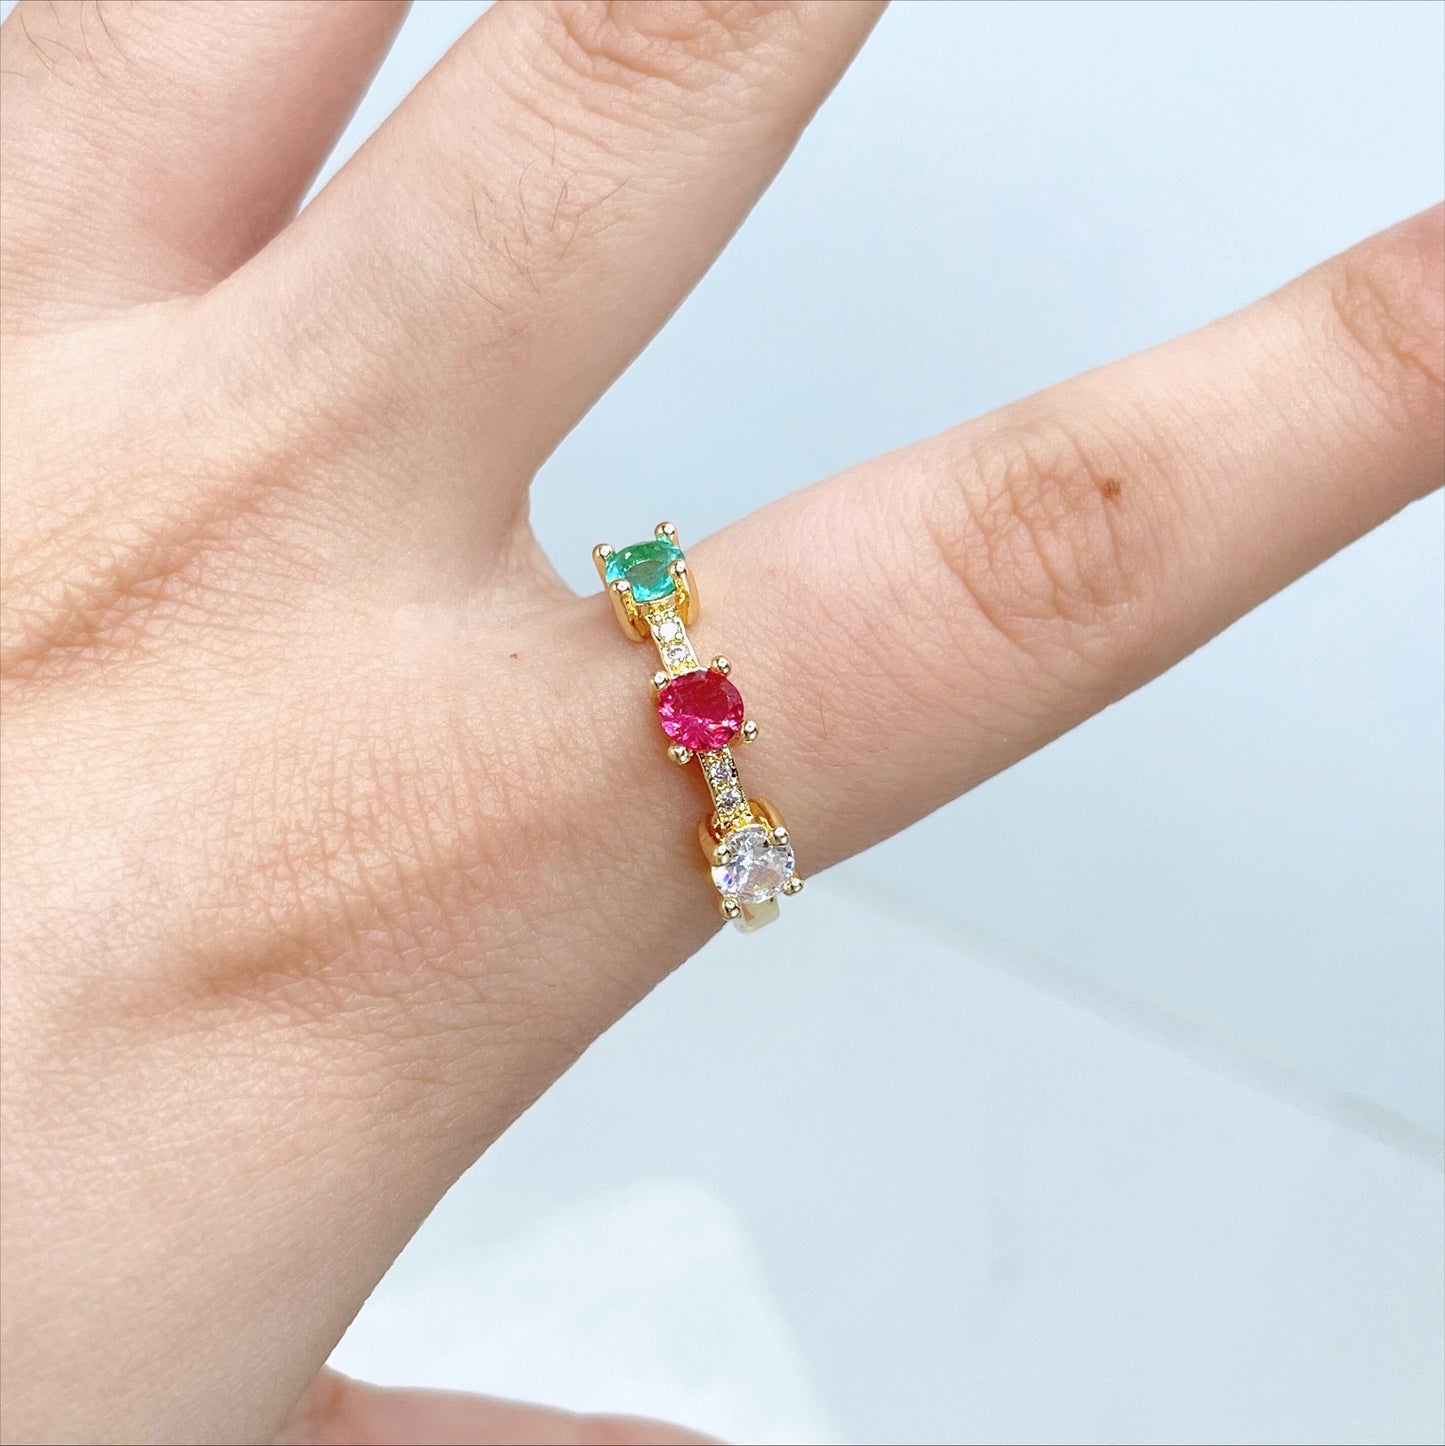 18k Gold Filled Colored Cubic Zirconia in Pink, Green & White Stackable Ring, Colored Zirconia, Wholesale Jewelry Making Supplies